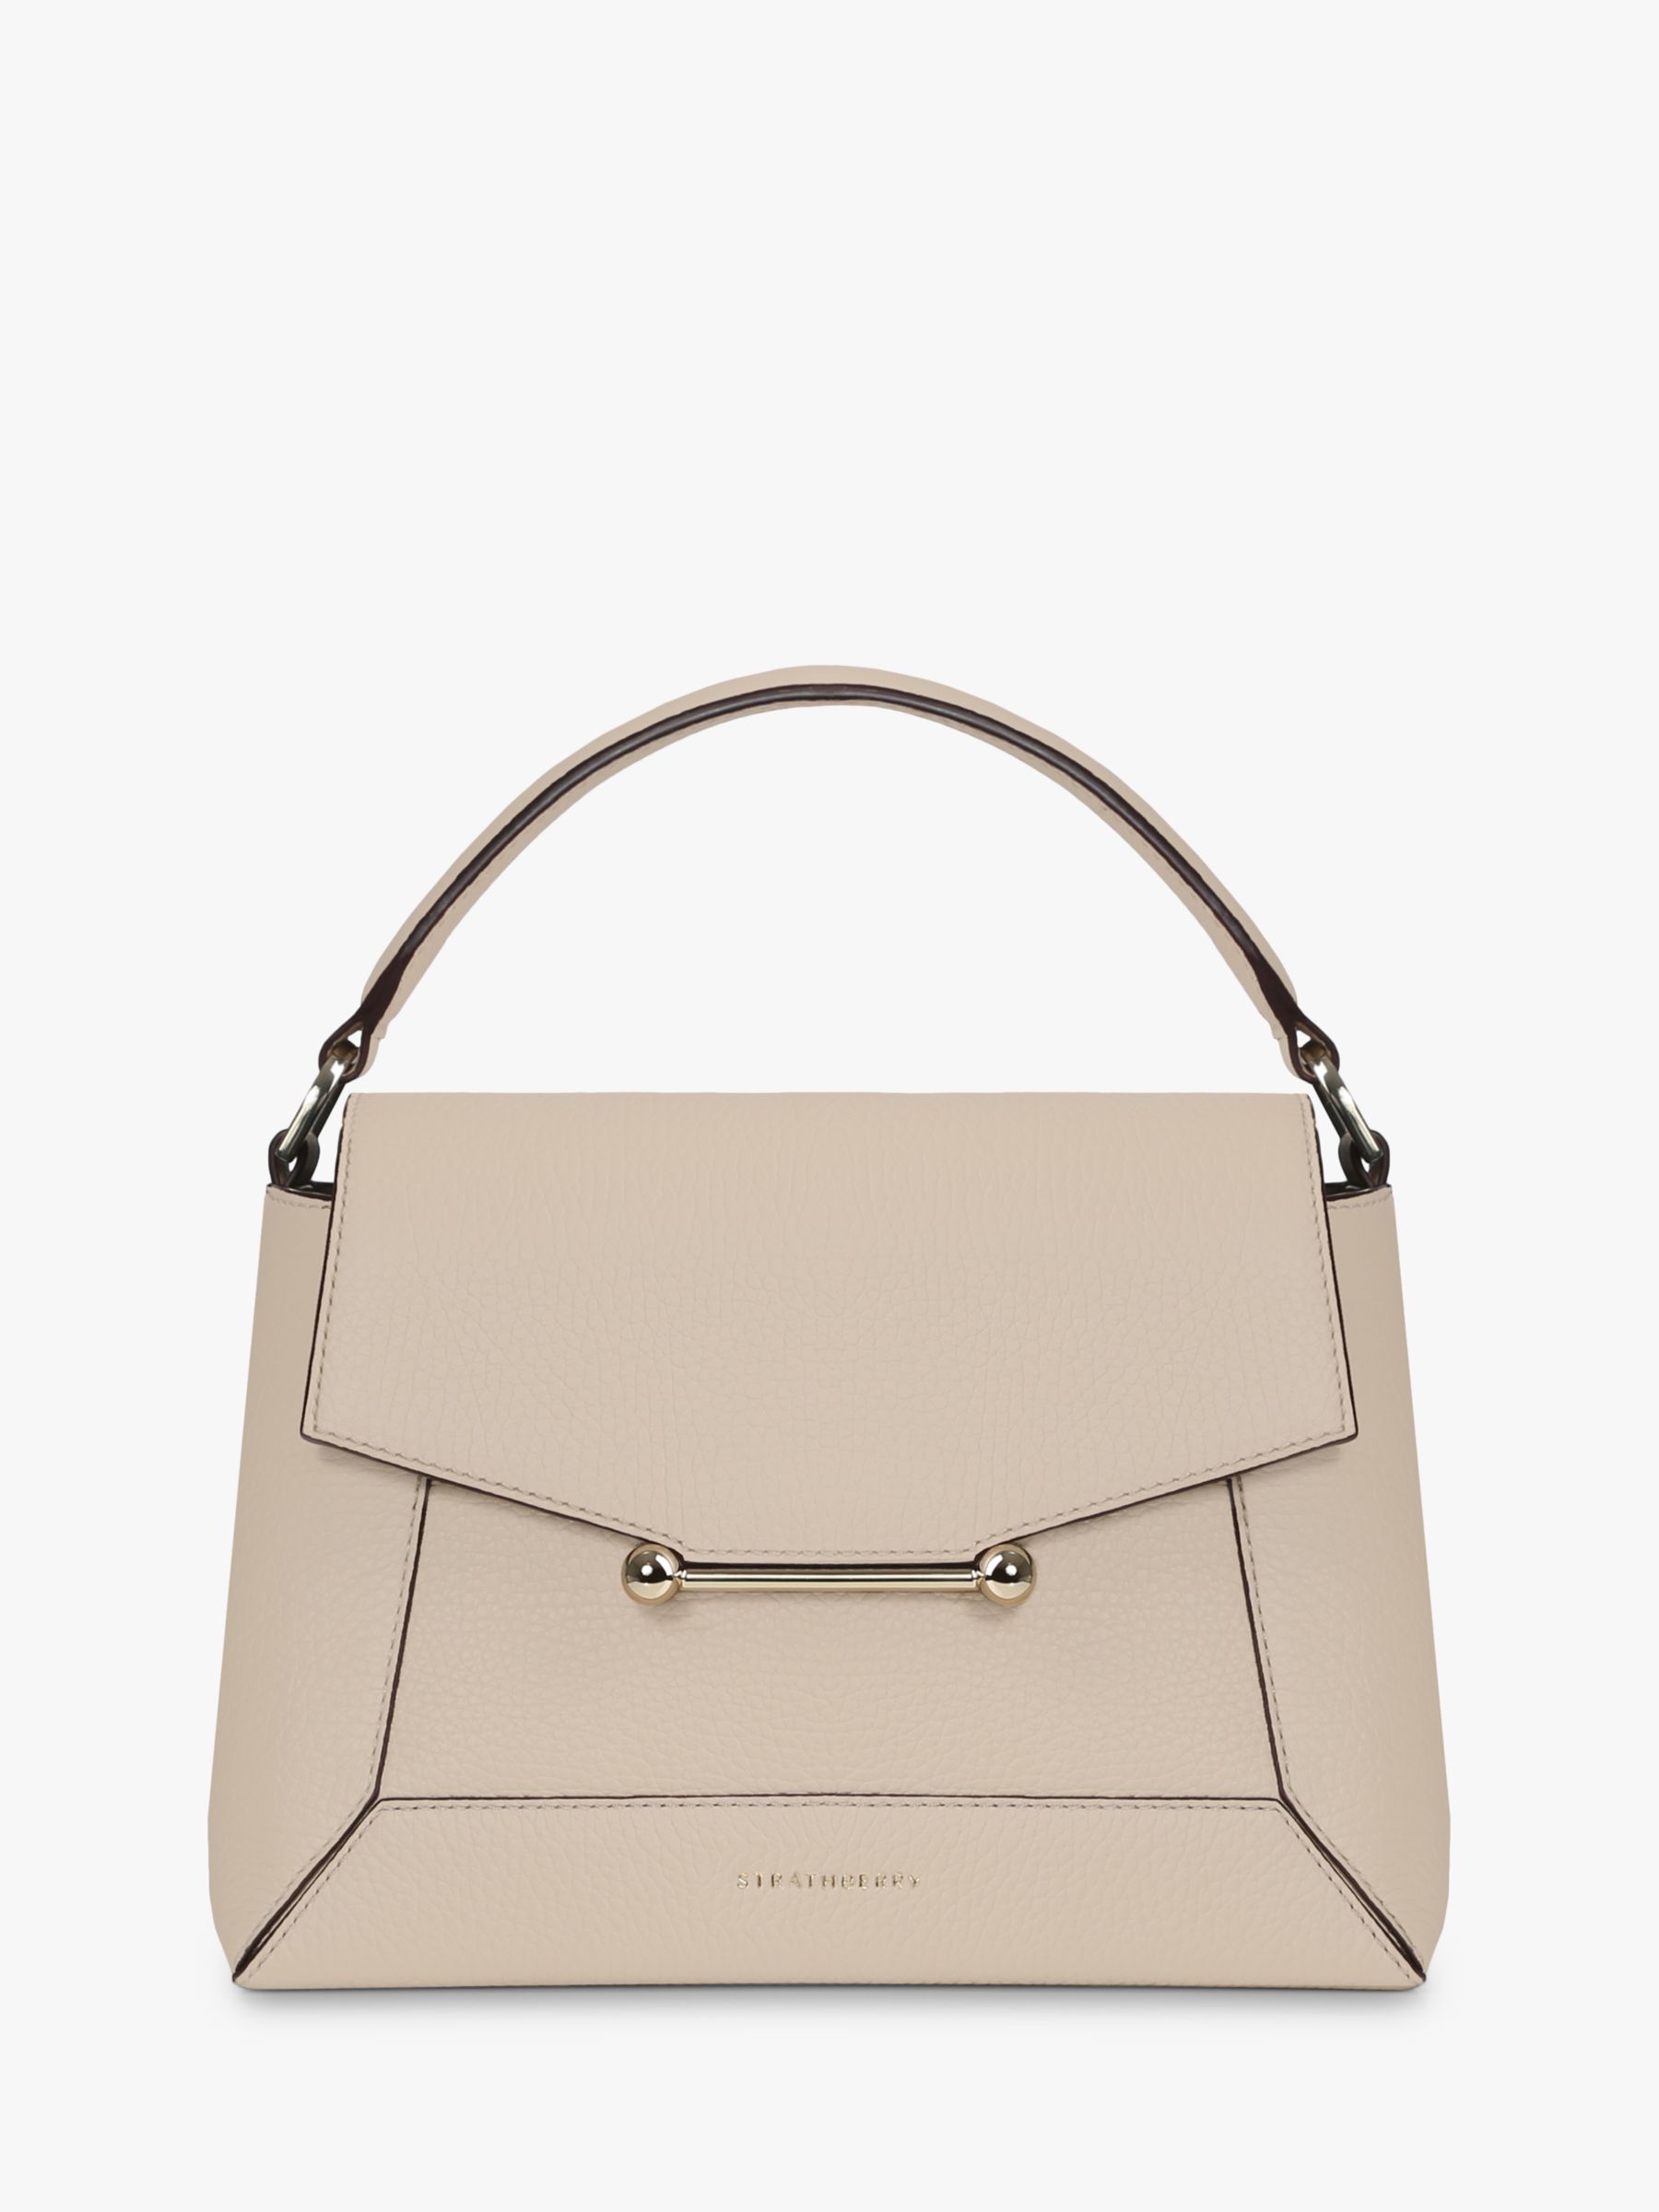 Strathberry - Lana Osette - Leather Mini Bucket Bag - Natural